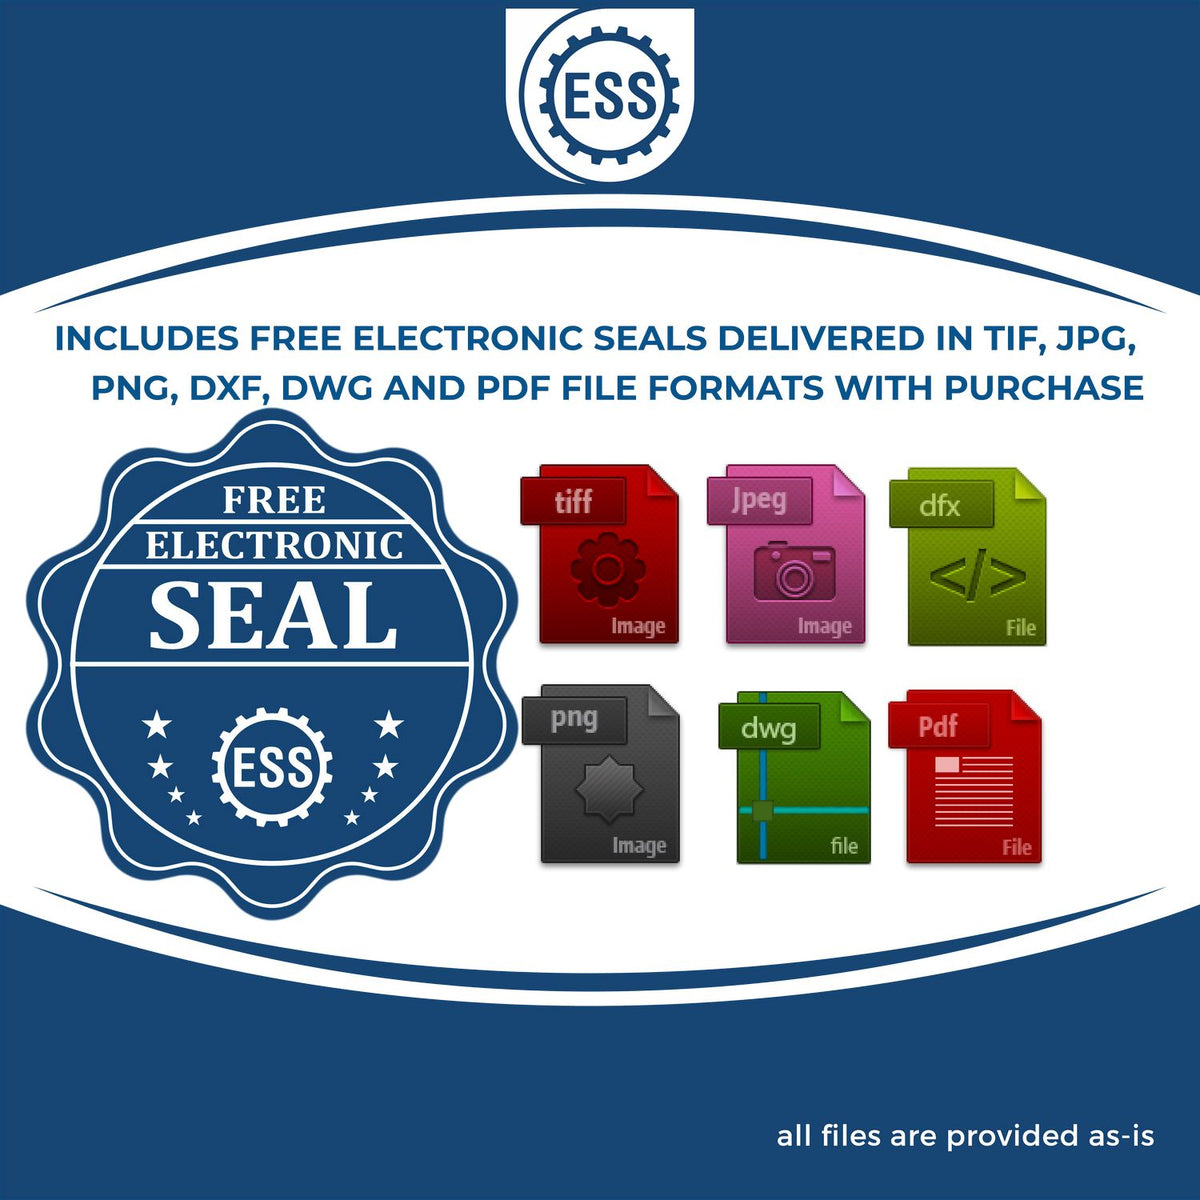 An infographic for the free electronic seal for the MaxLight Premium Pre-Inked Missouri Rectangular Notarial Stamp illustrating the different file type icons such as DXF, DWG, TIF, JPG and PNG.